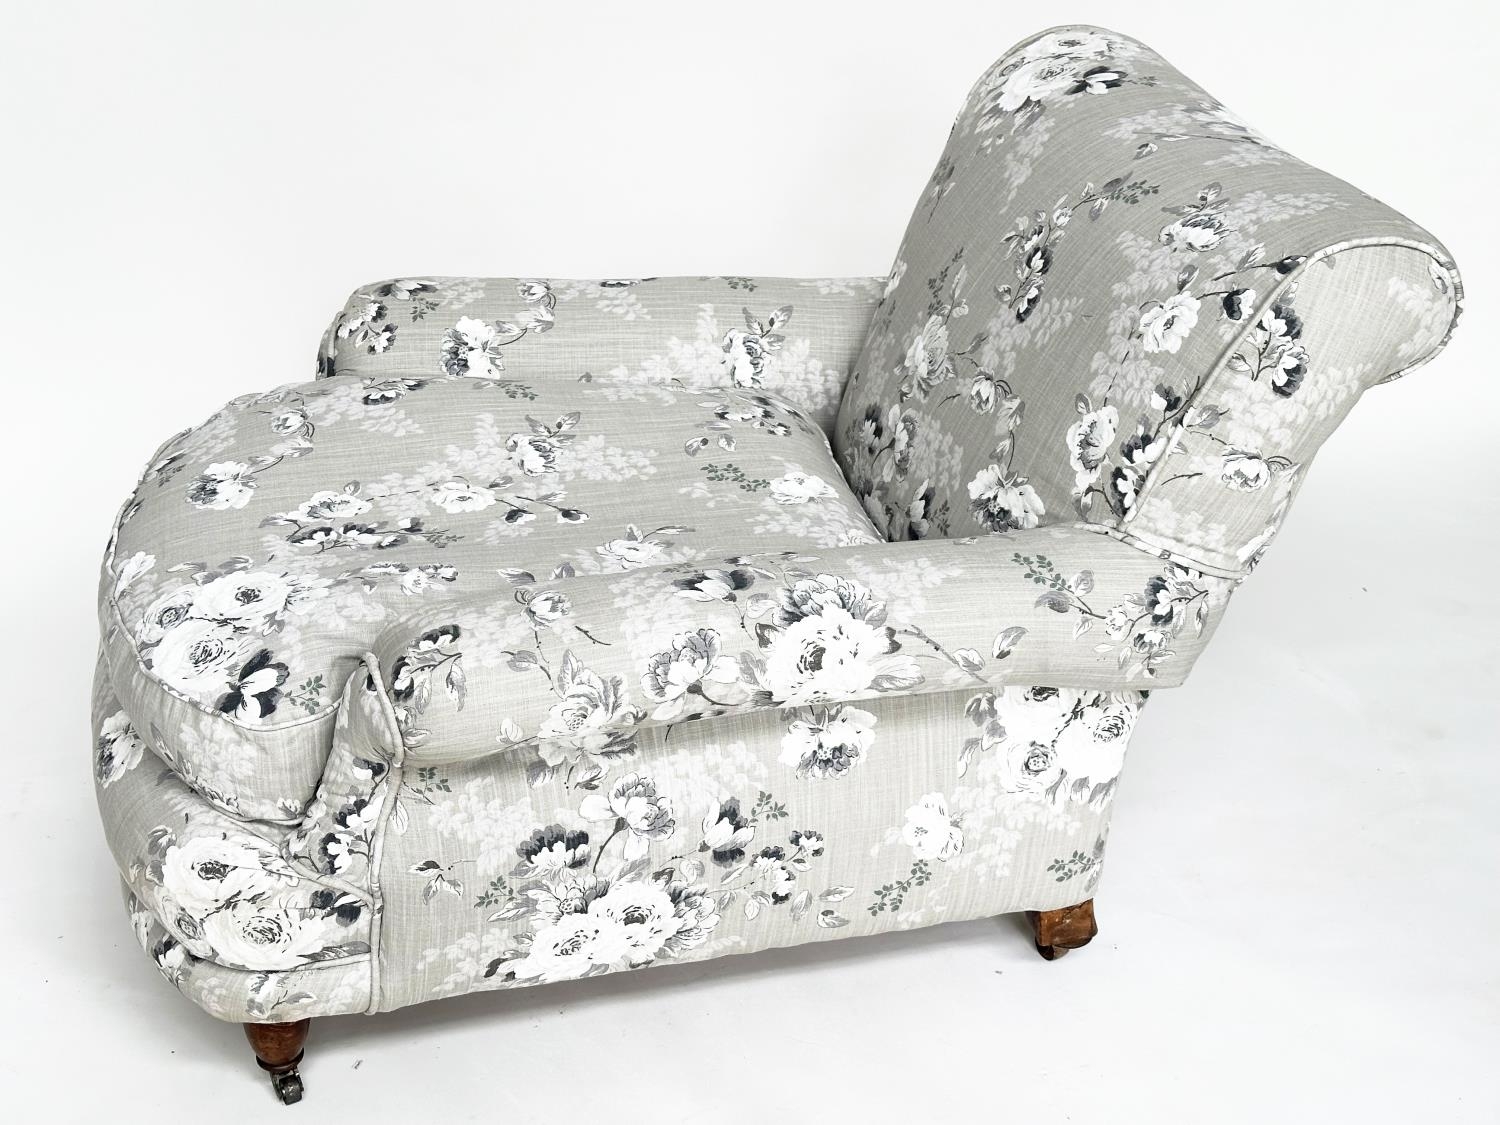 WILLIAM BIRCH ARMCHAIR, 19th century Howard type, newly upholstered in grey linen impressed numerals - Image 5 of 13